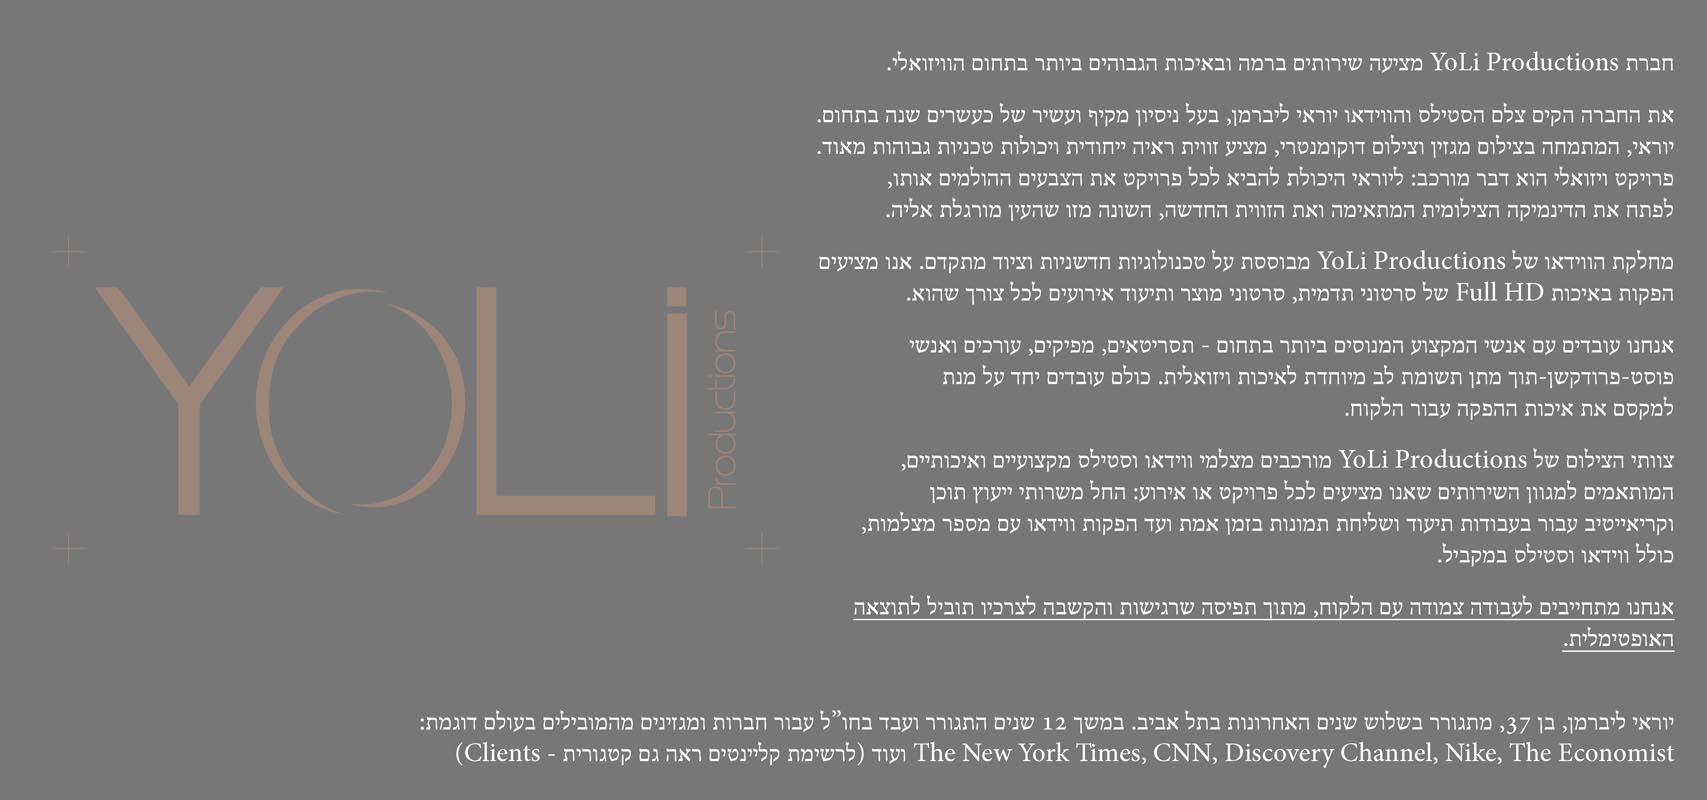 Produced for the Israeli Academy of Science and Humanuty & The Jerusalem Press Club.The first science journalist mission to Israel.Yoli Productions, Yoray LIberman